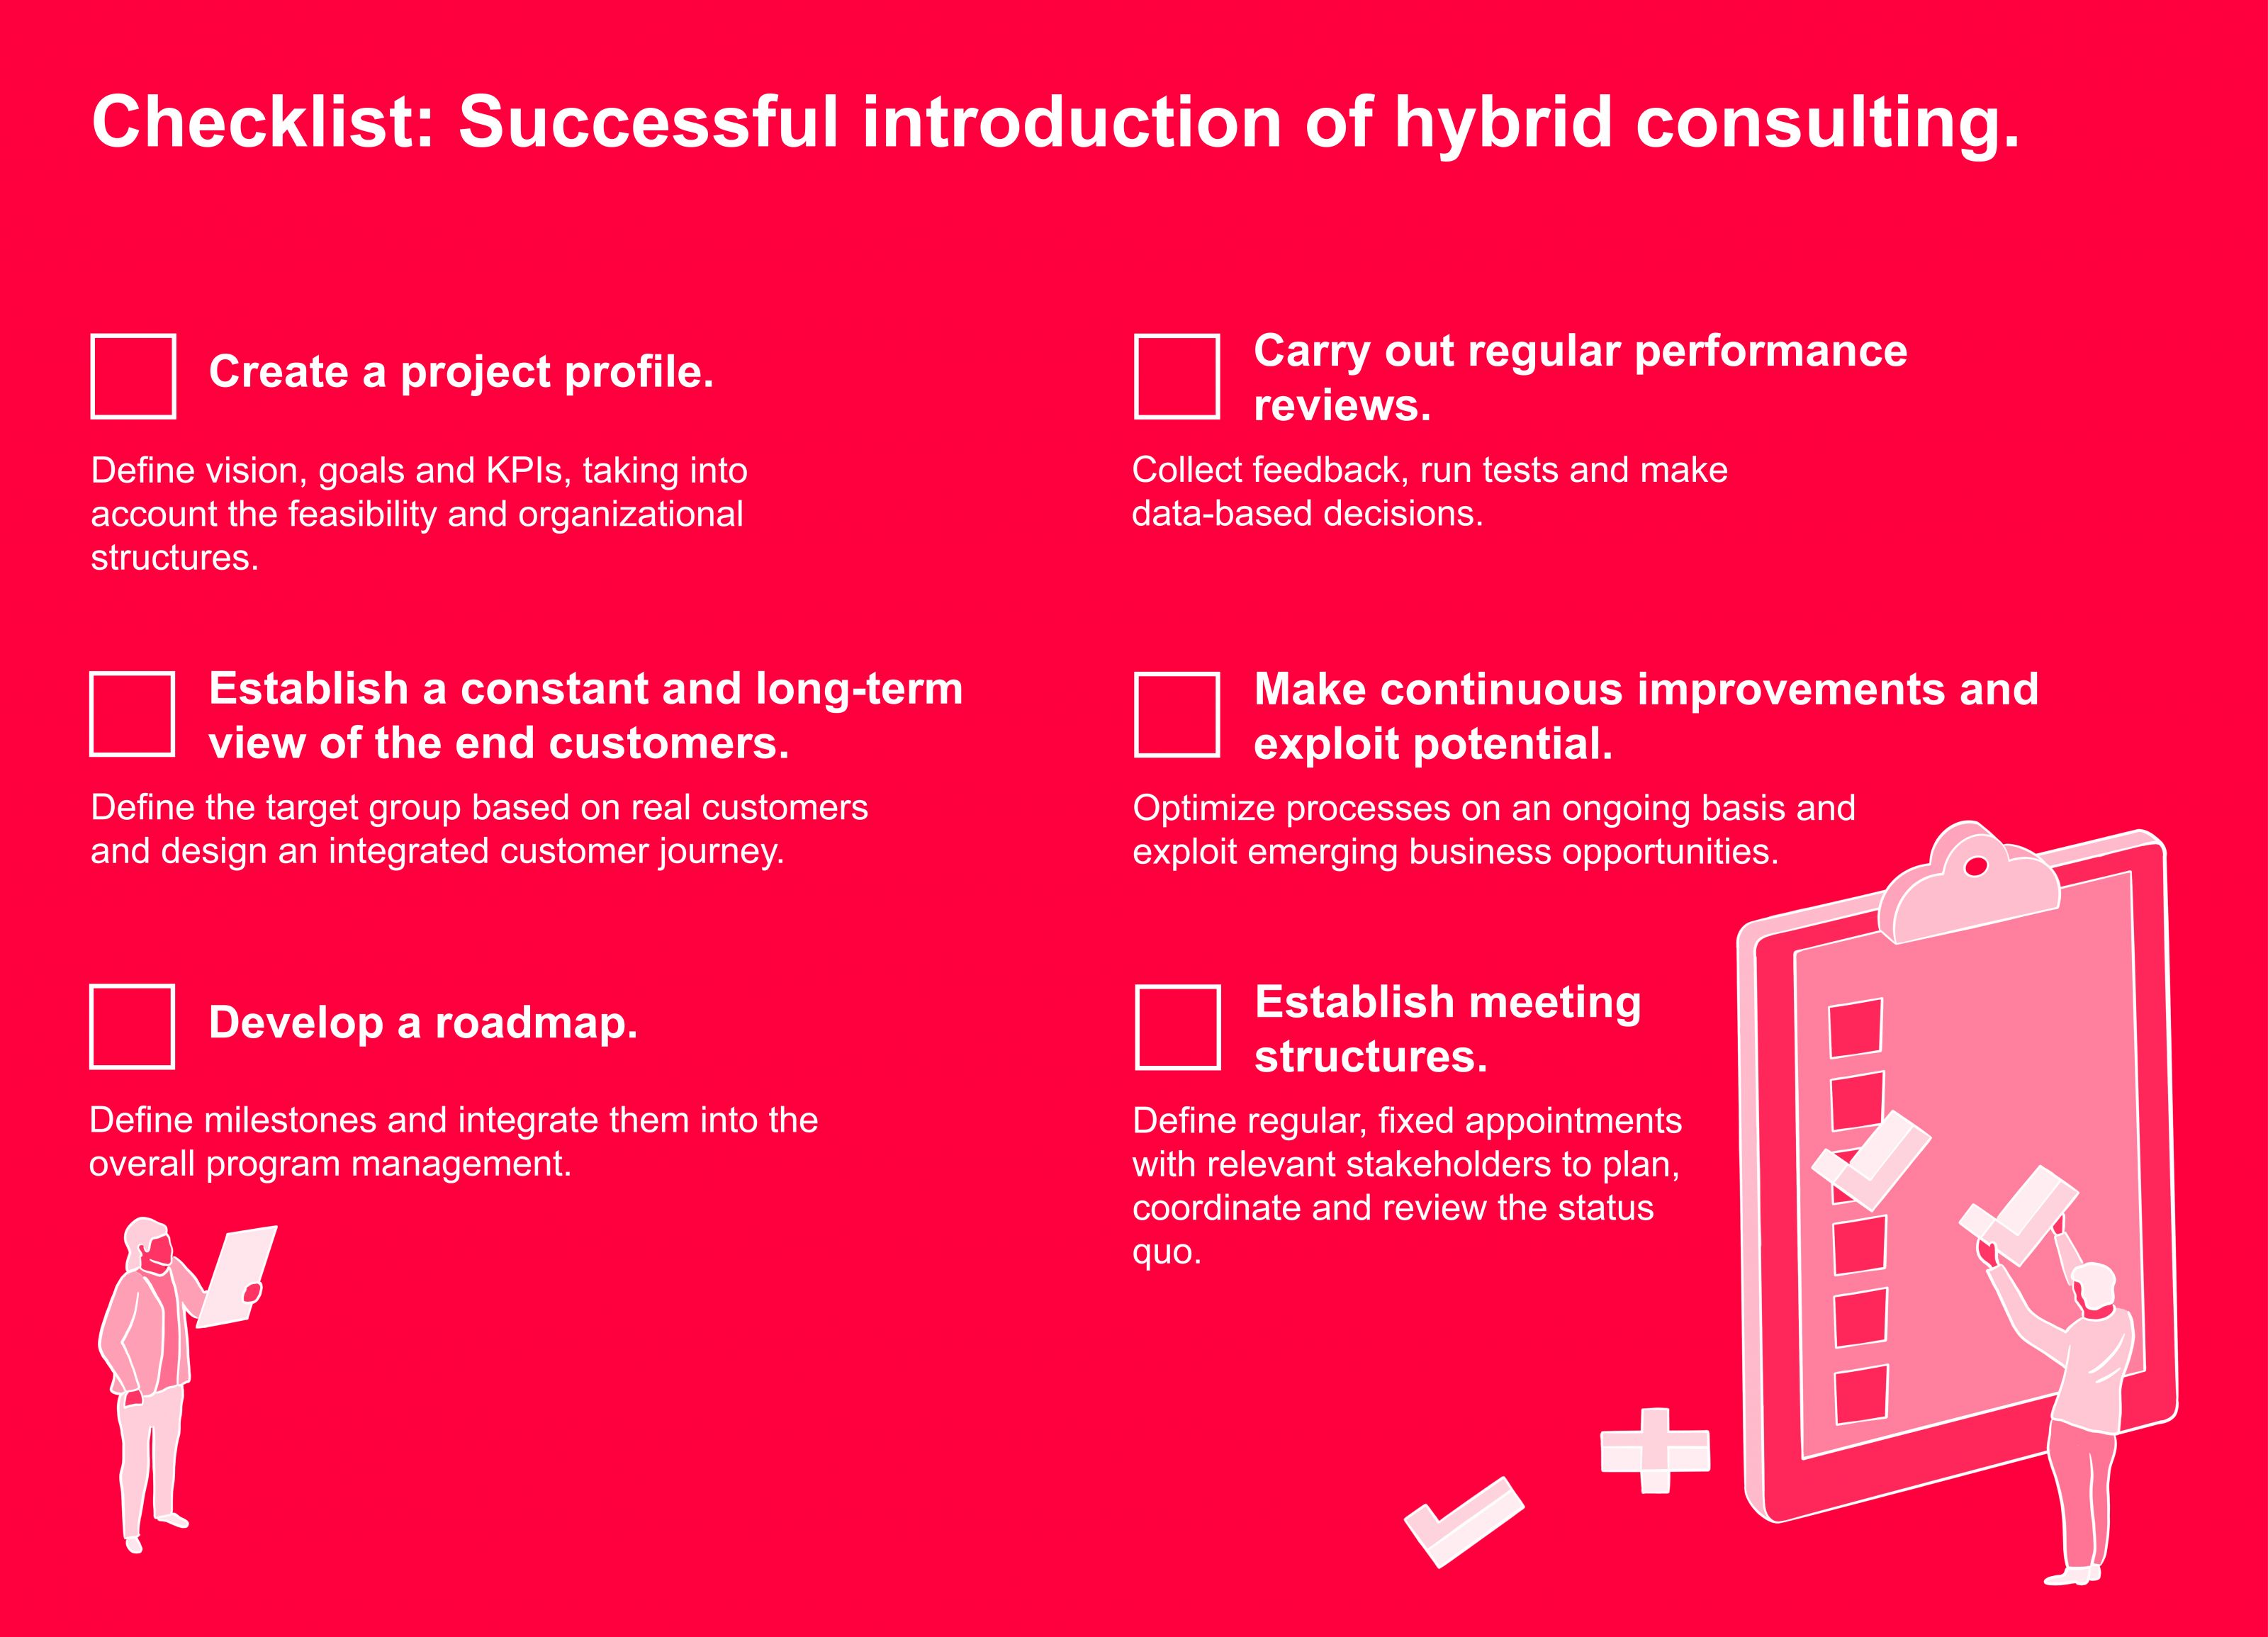 Checklist for the introduction of hybrid consulting